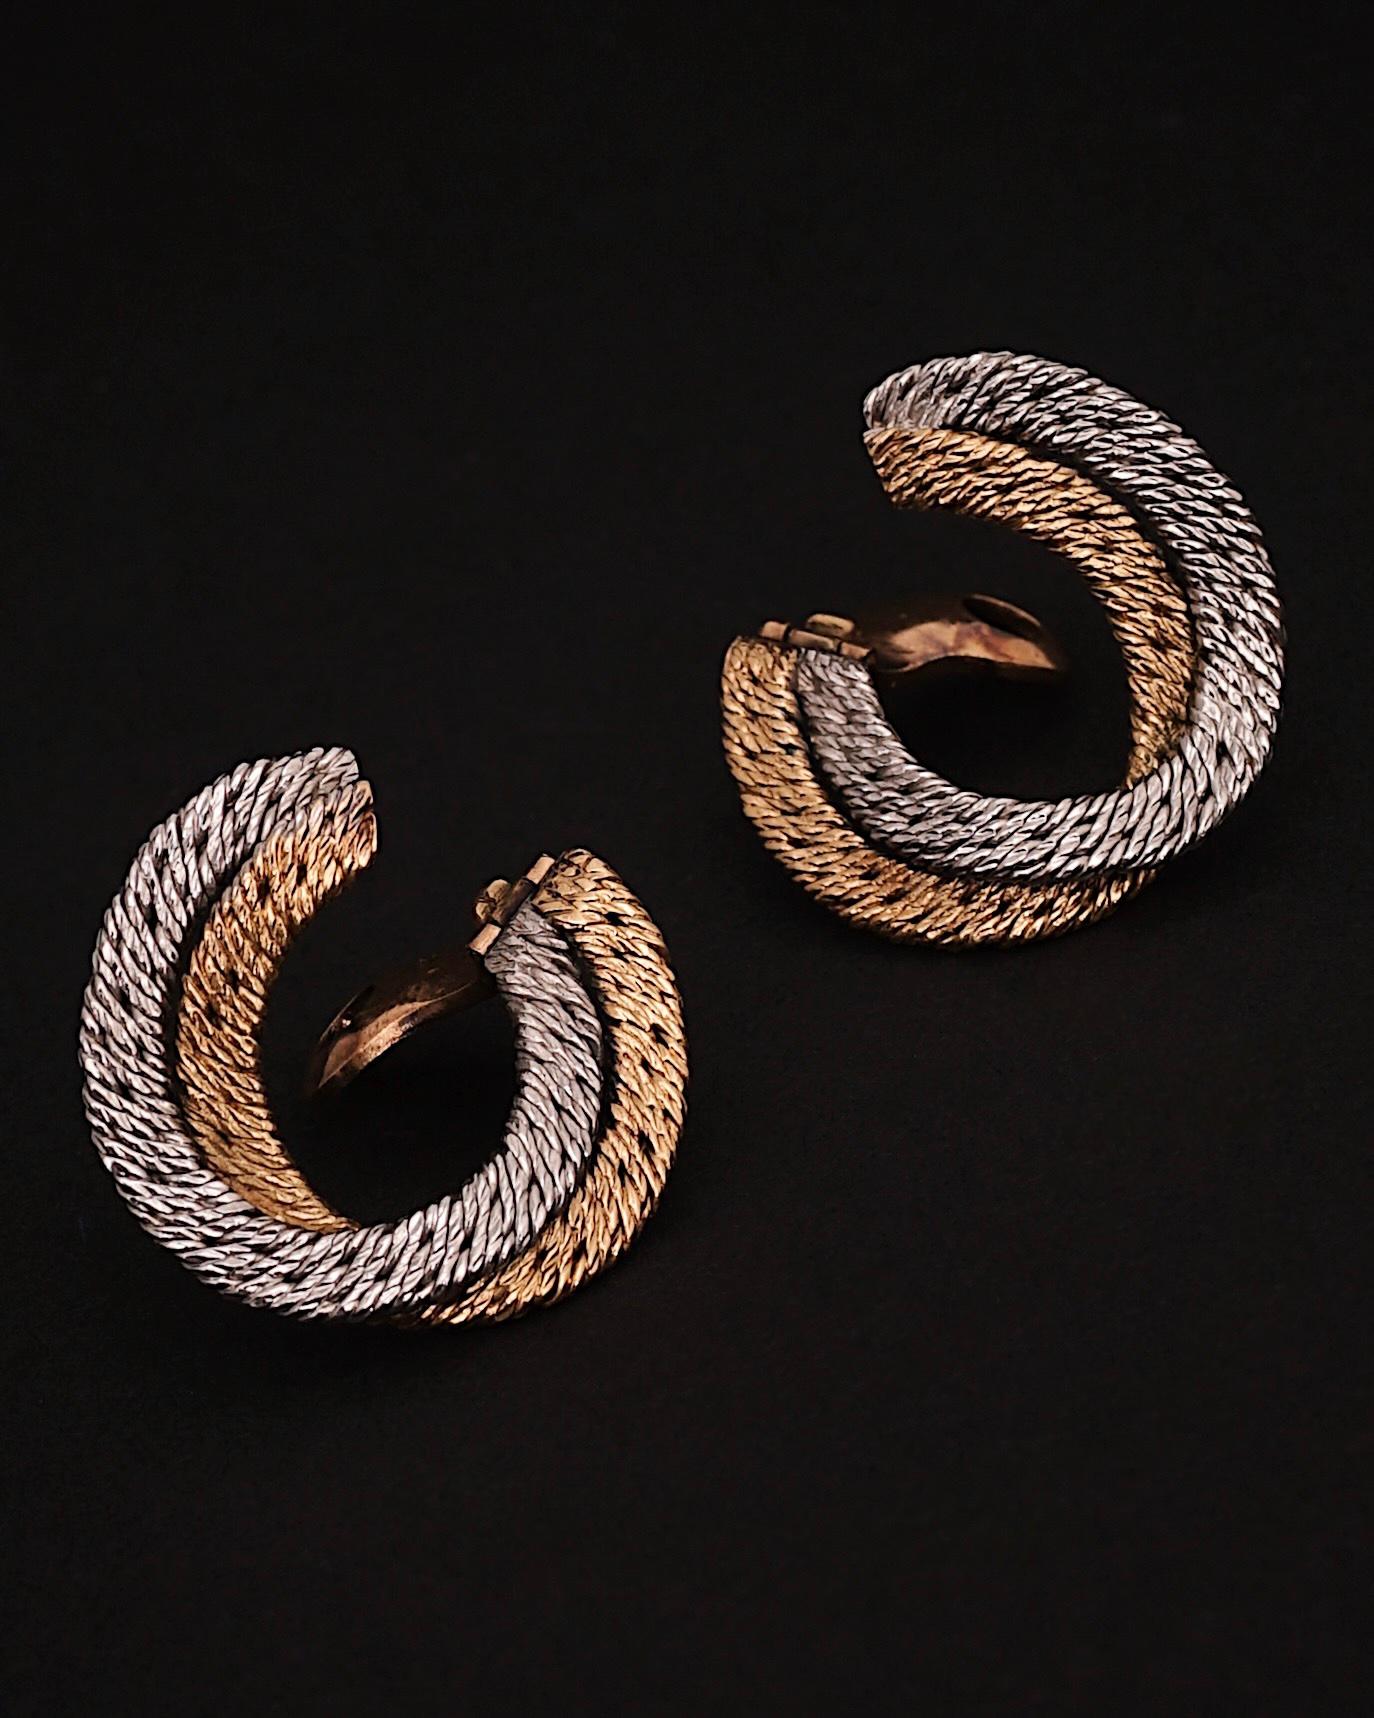 Women's Georges Lenfant, 18k White & Yellow Gold 'Paillettes' Hoops Earrings, Late 1960